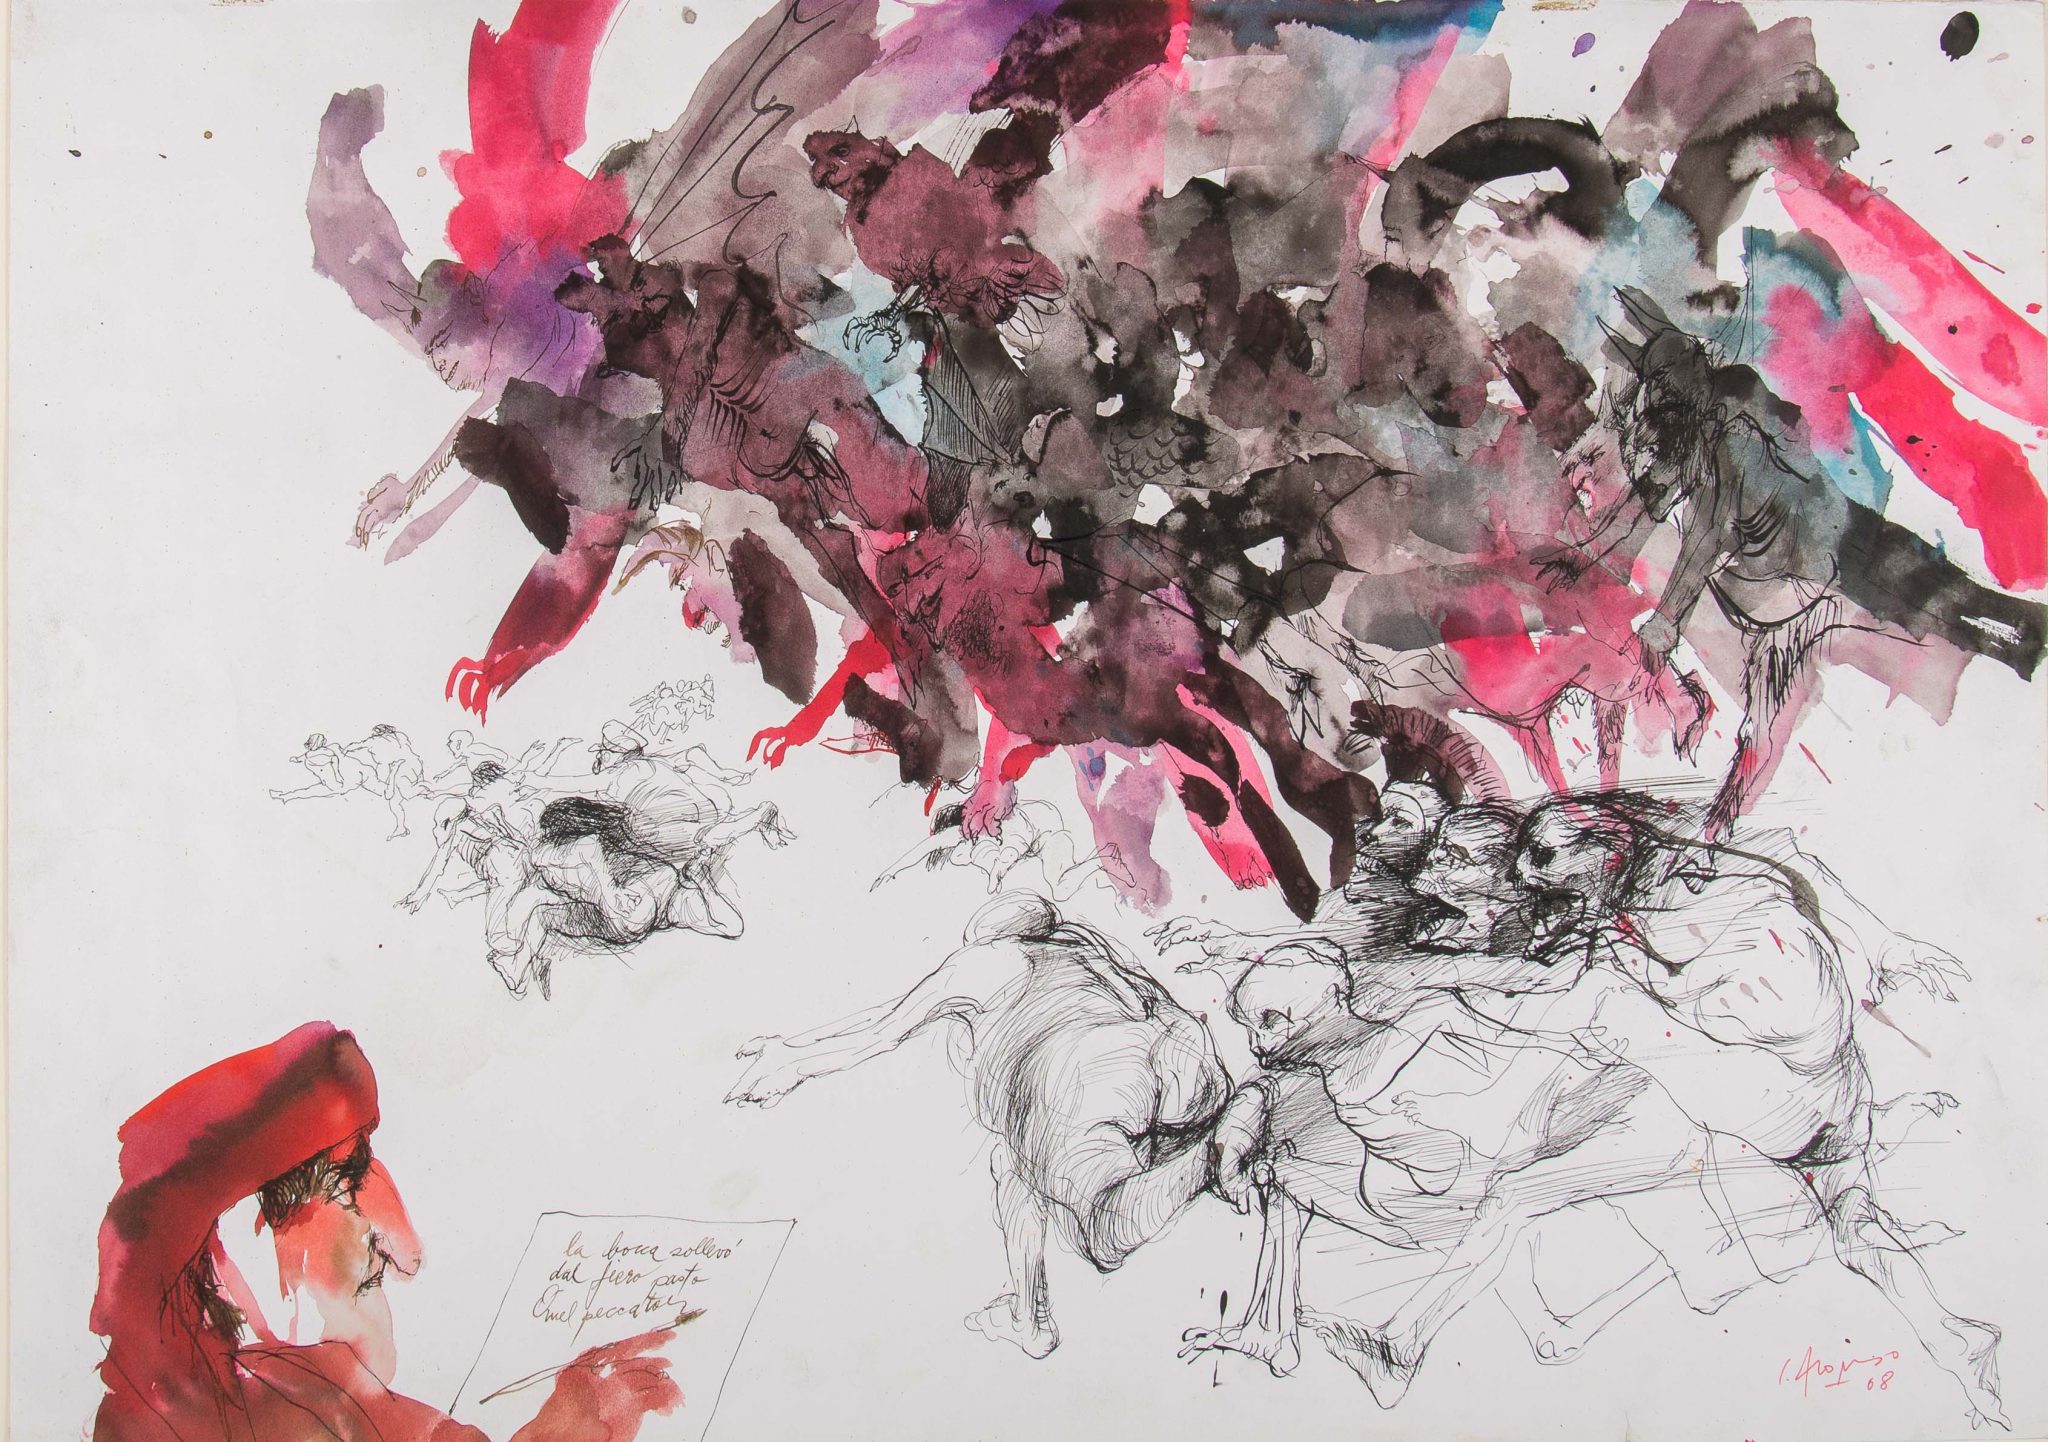 A figure of the poet Dante at the left and a swarm of screaming figures running around a swirl of dark purple and black-hued colors which has arms reaching out toward them